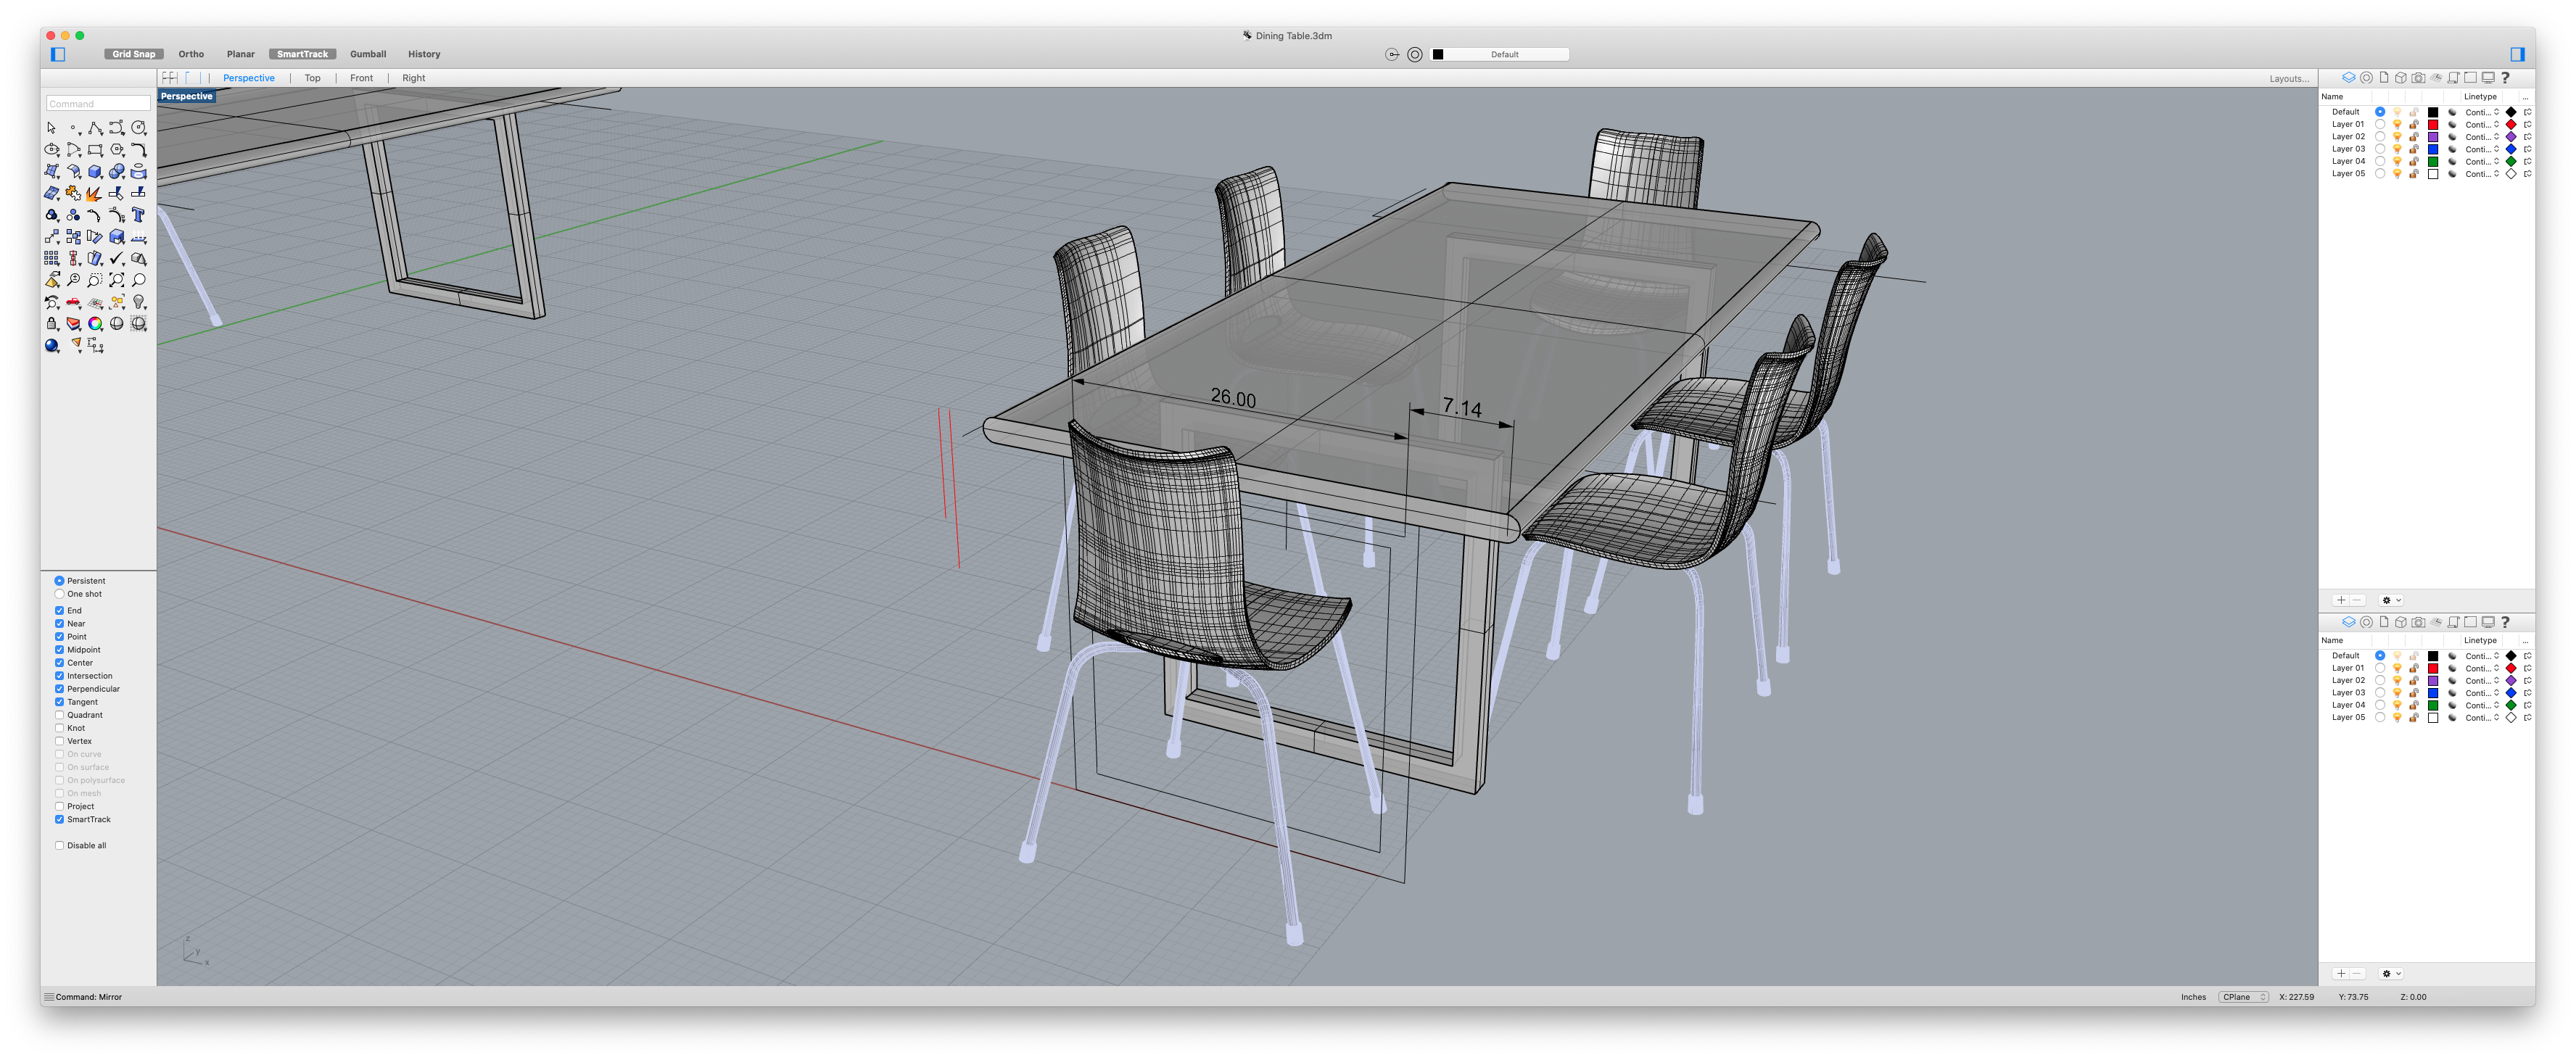 3D Render of the table for scale